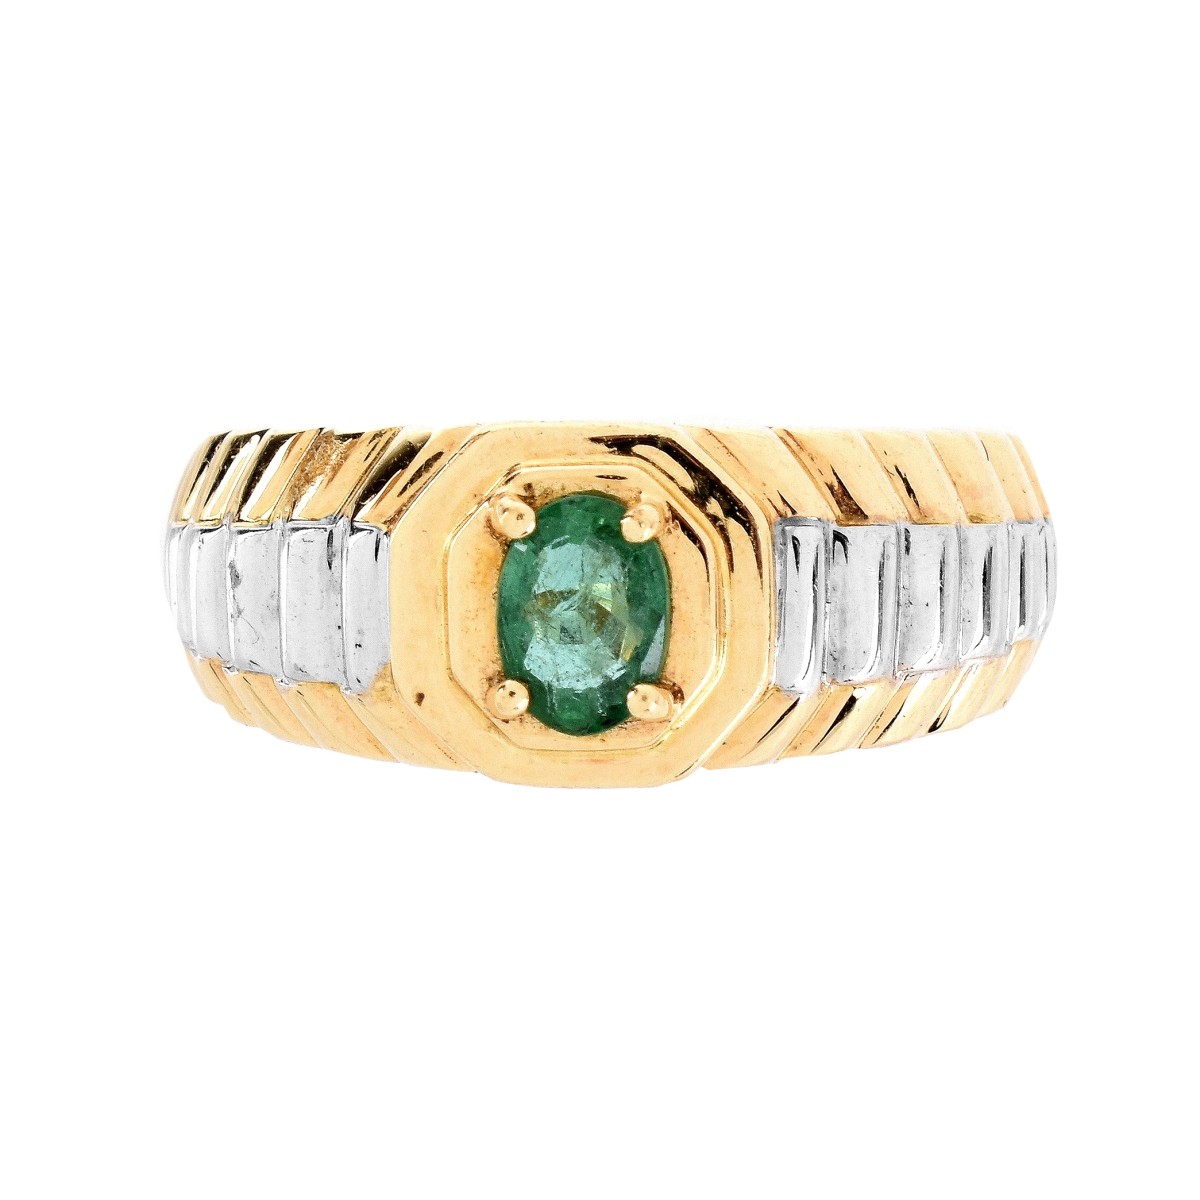 Man's Vintage Emerald and 14K Ring